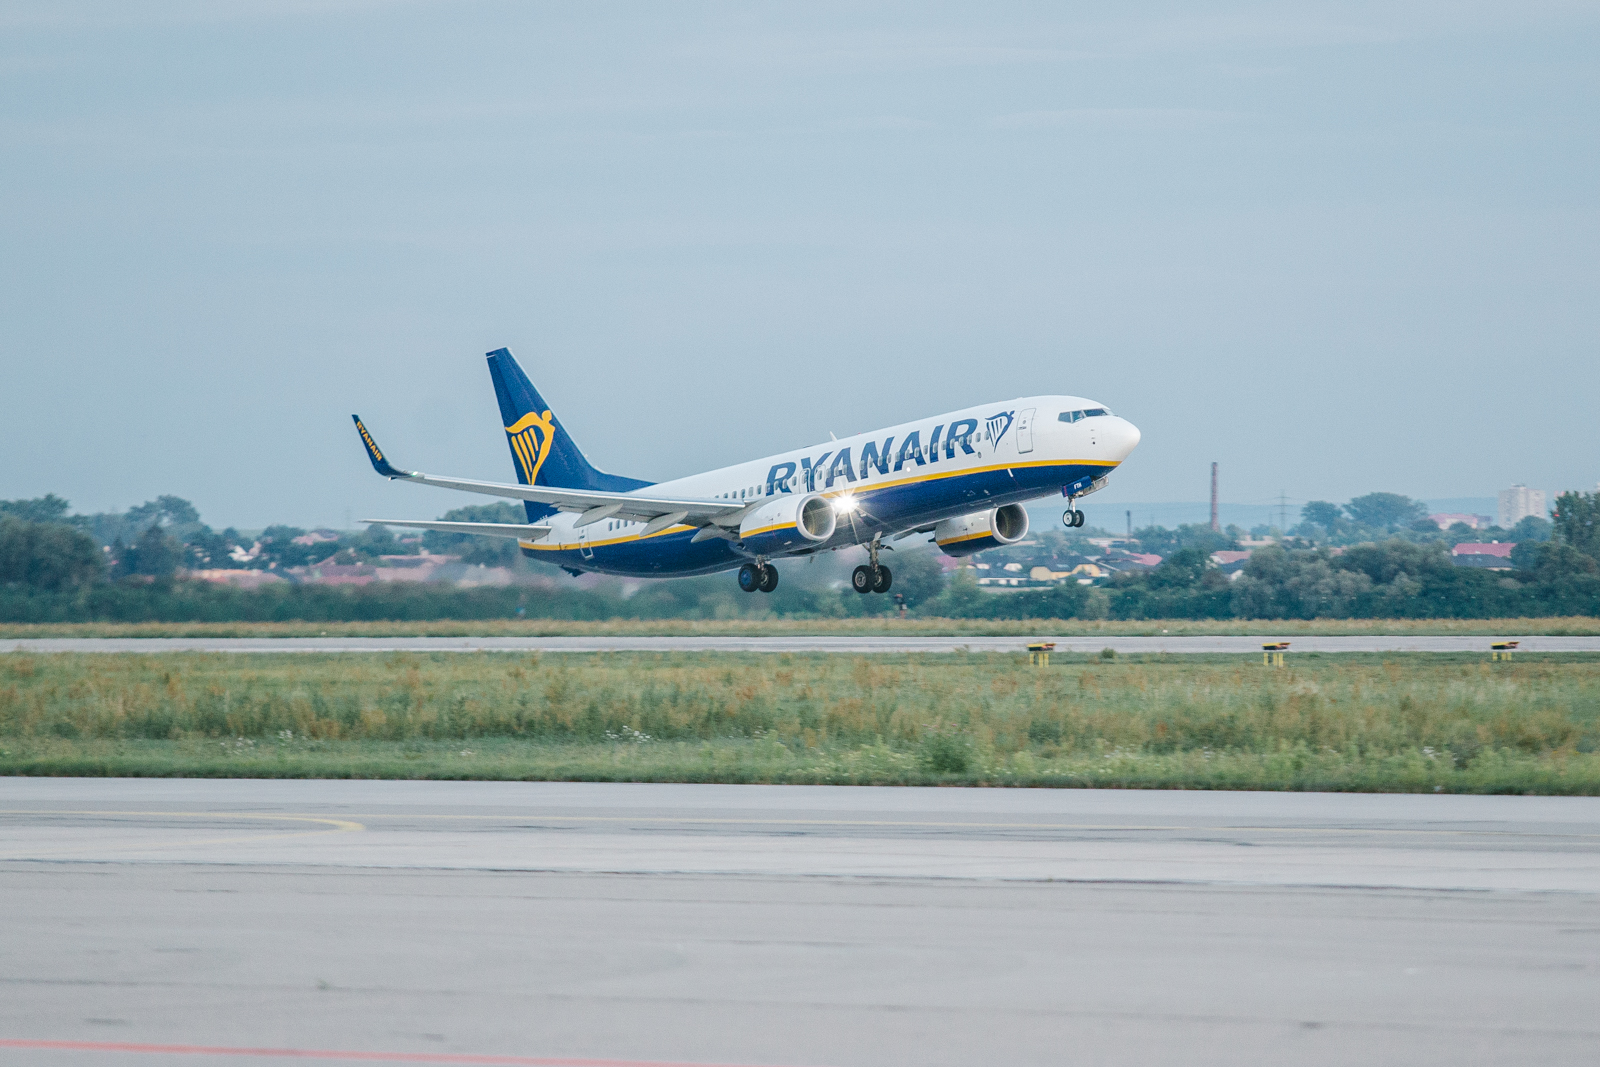 Ryanair Launches Lithuania Winter 19 Schedule 34 Routes, 2 Million Customers